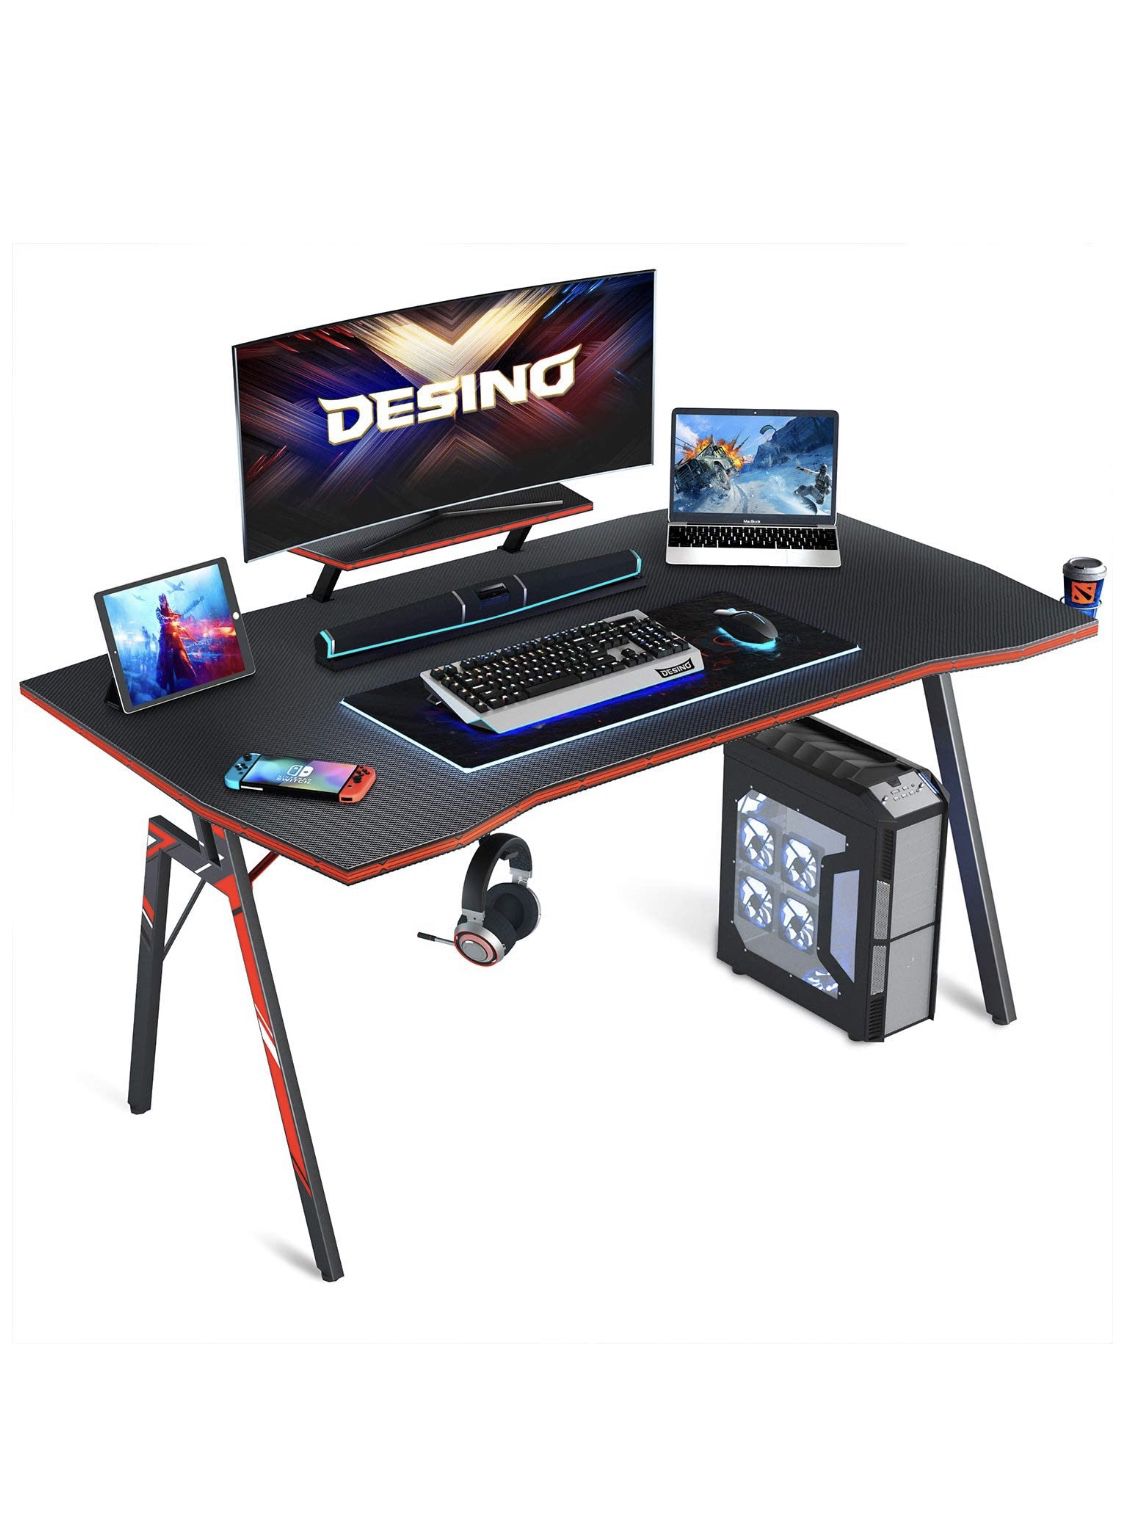 New Gaming and PC Computerg Desk- $110